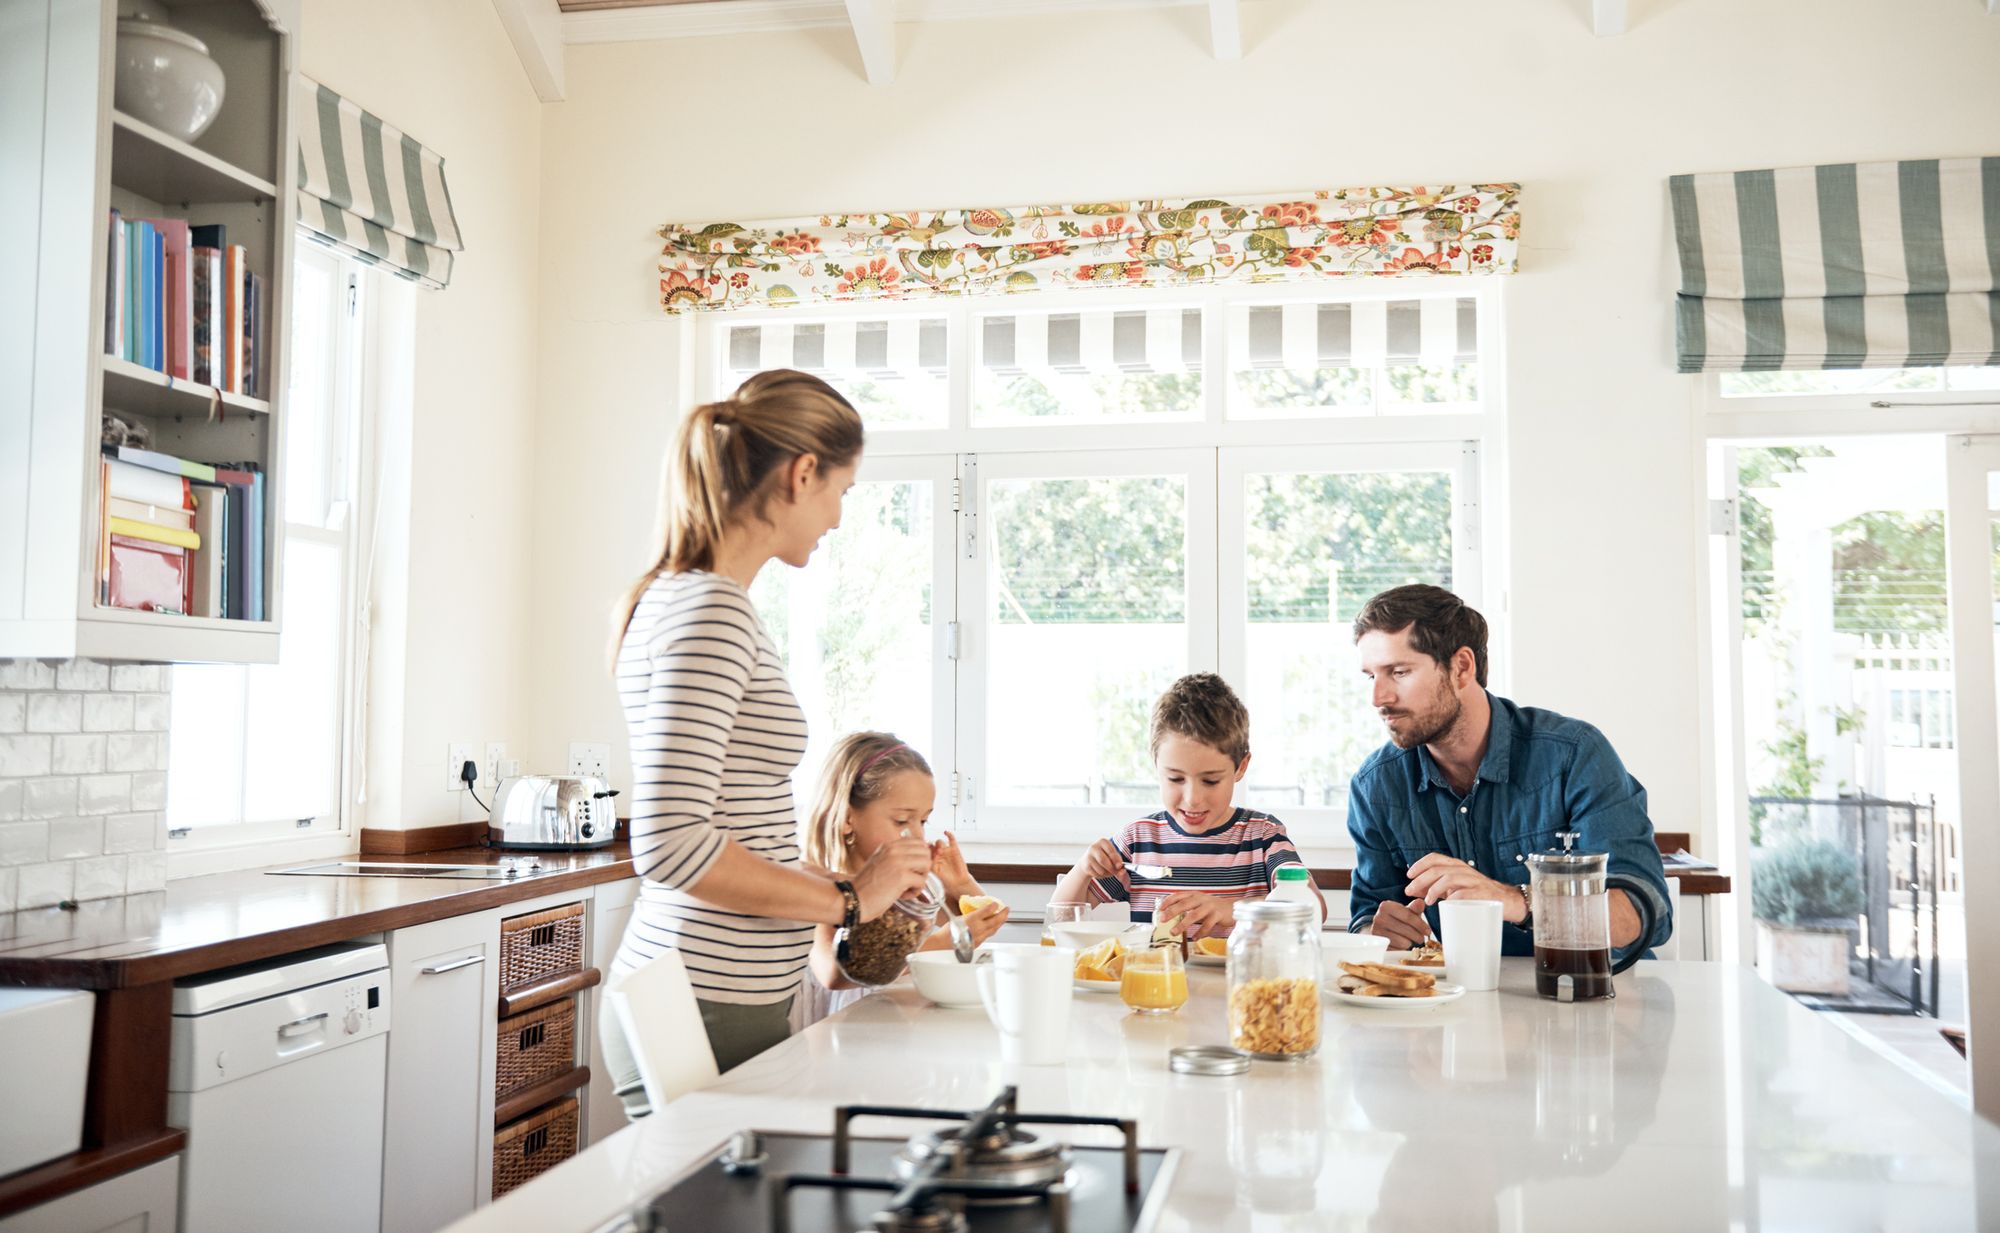 Family eating in kitchen on HomeExchange vacation